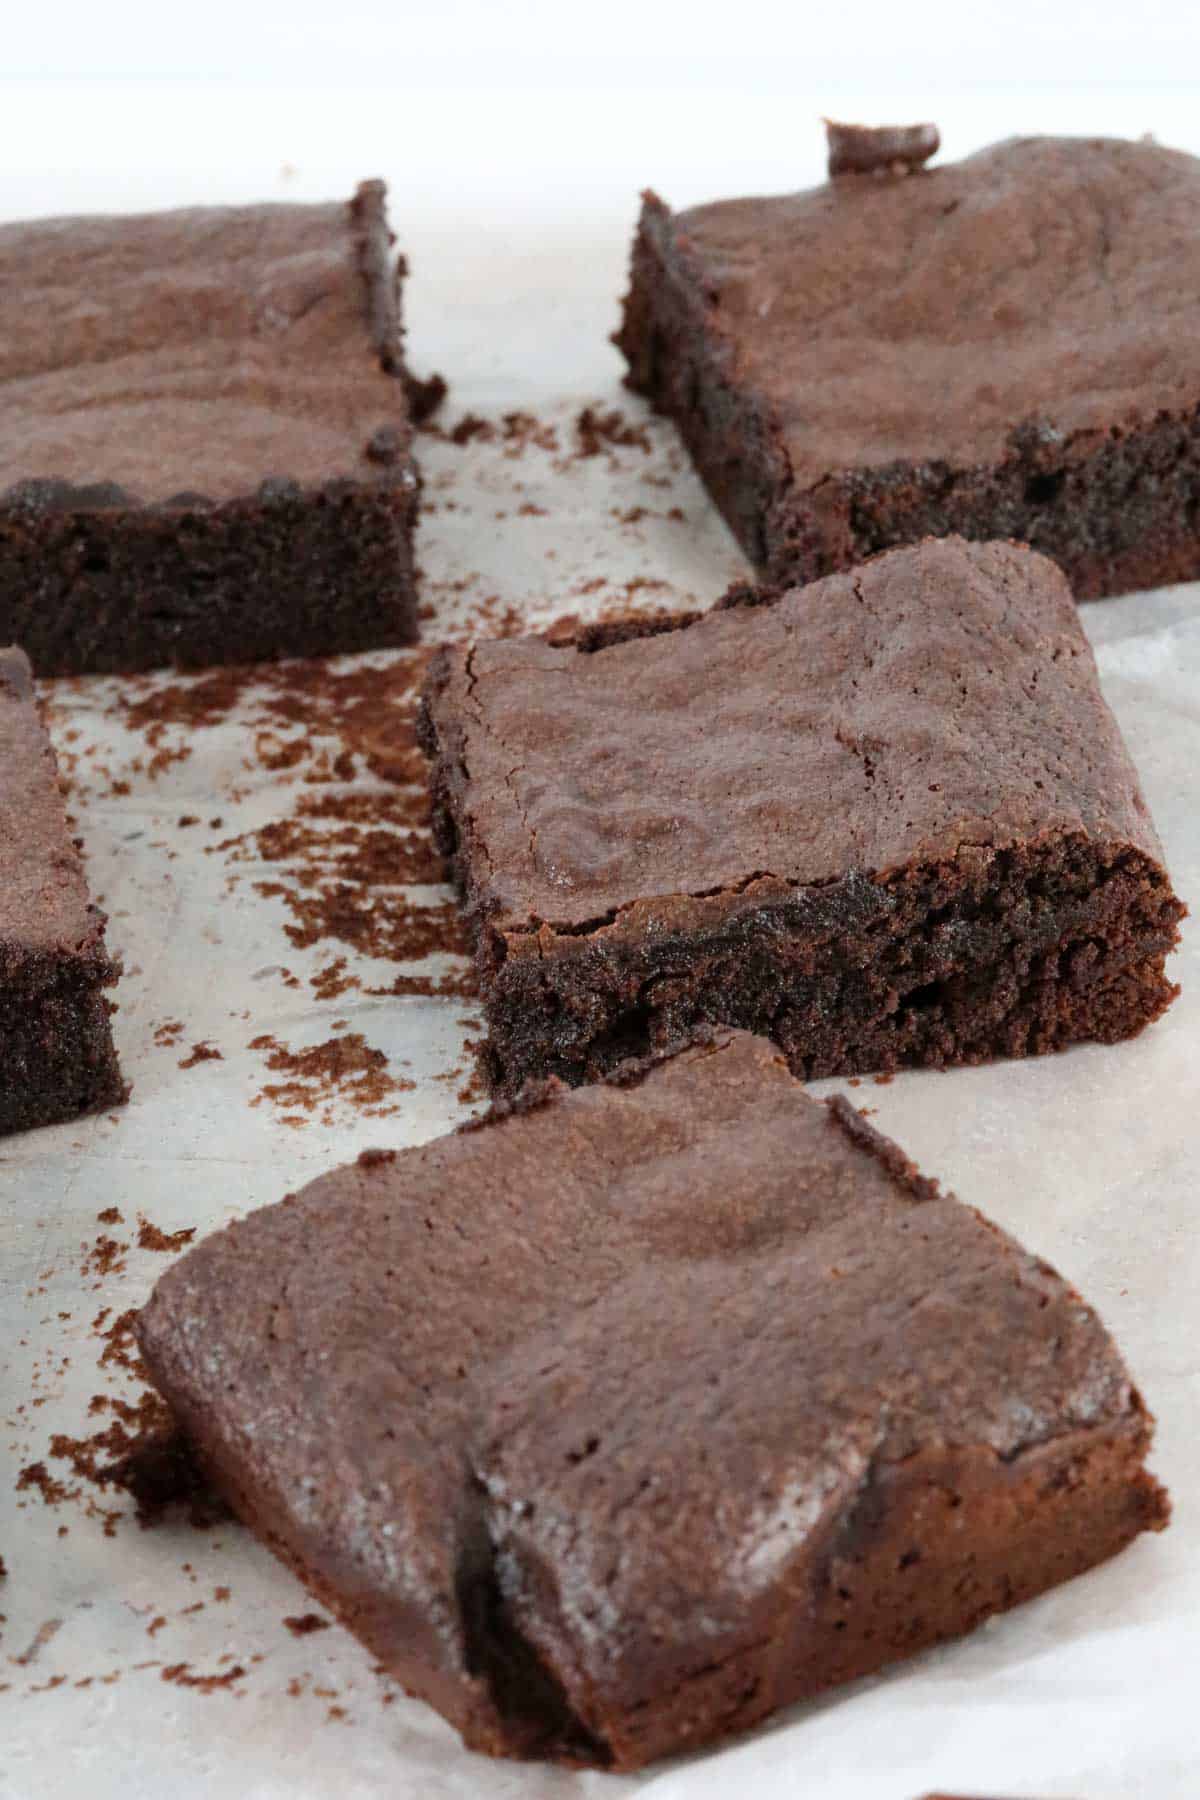 Crusty tops on dense fudgy brownies resting on baking paper.